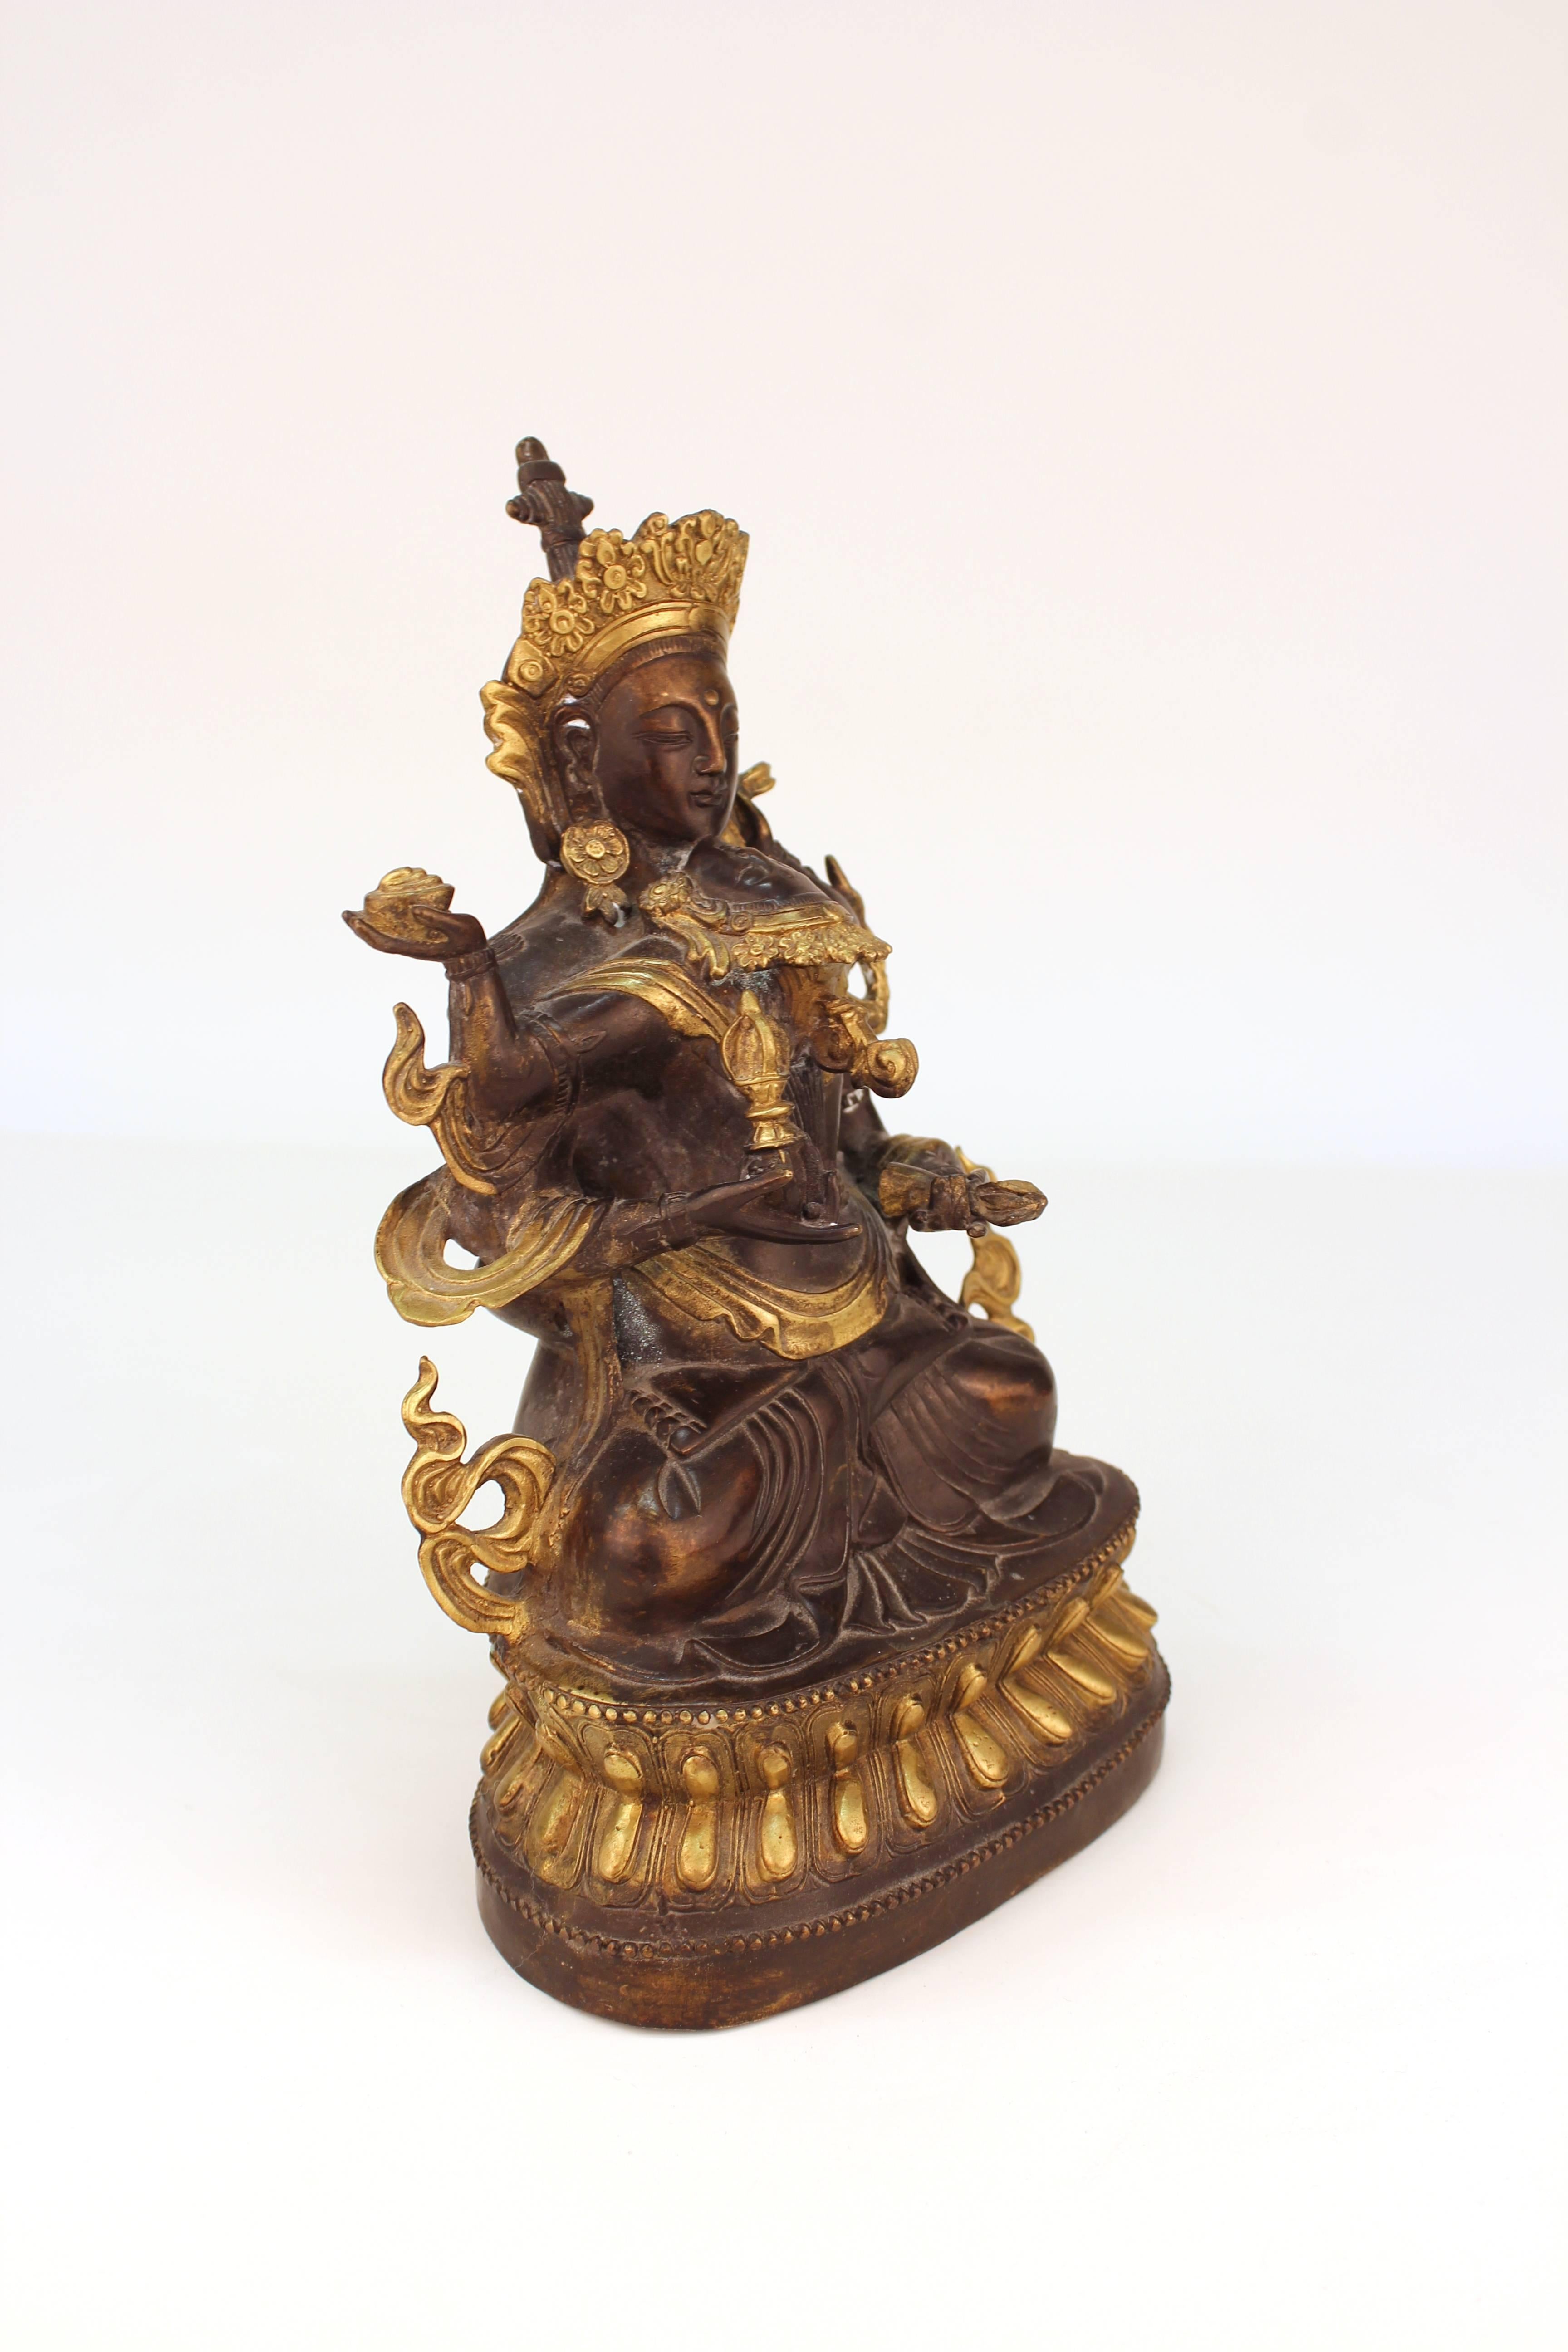 Tibetan Buddhist erotic bronze of Vajrasattva and his consort, seated on a throne, in yab yum. The cast has gilt accents and is in good vintage condition.